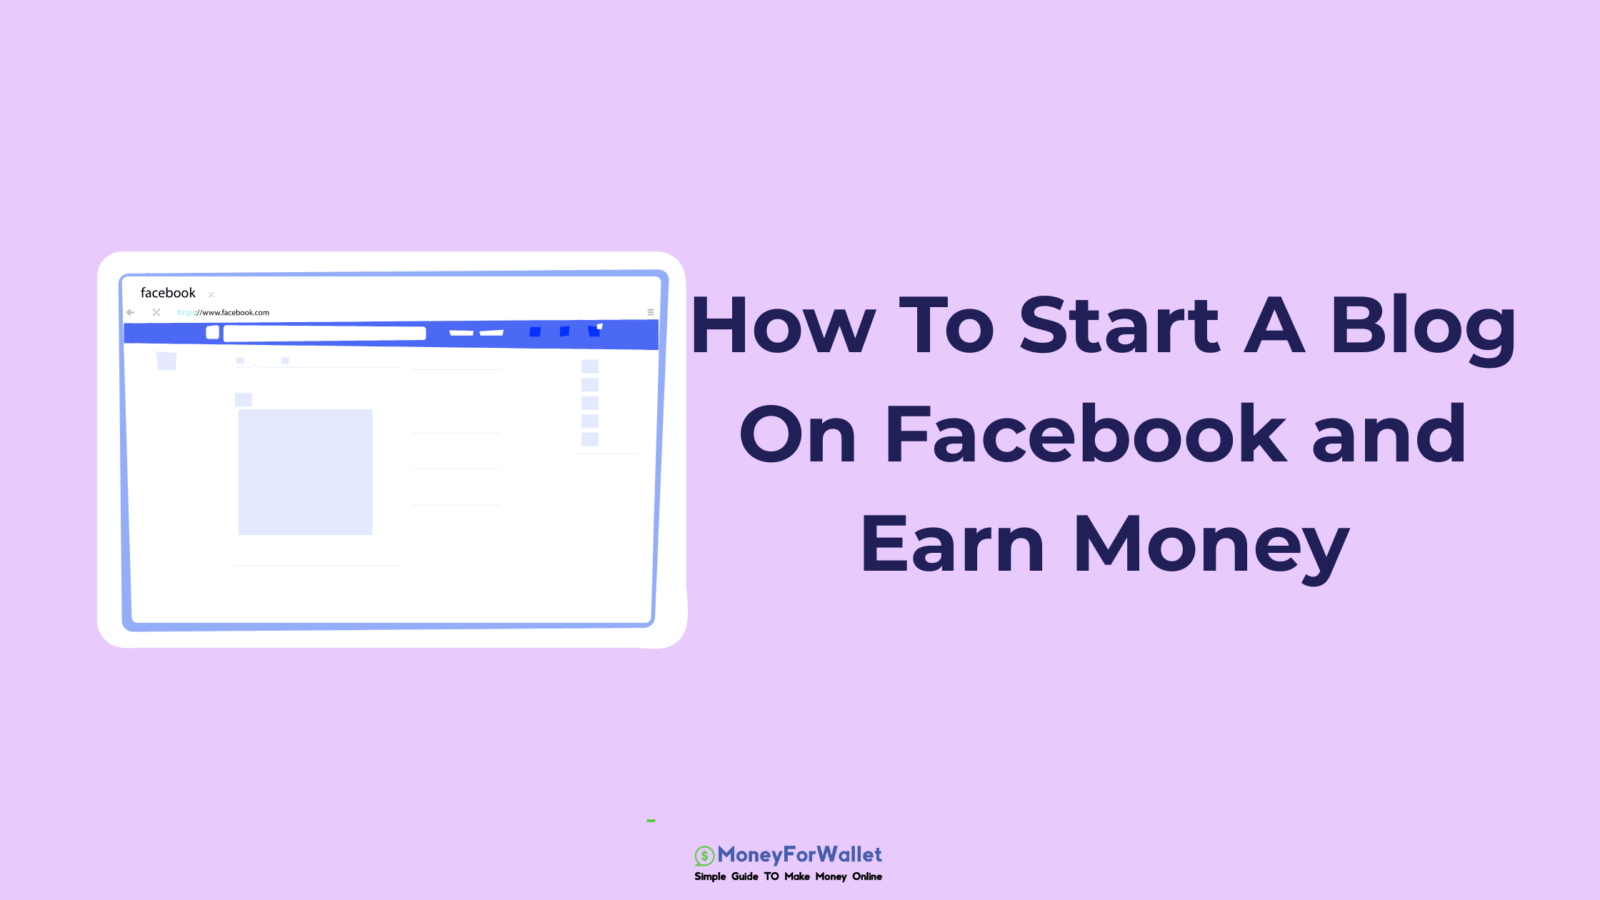 How To Start A Blog On Facebook and Earn Money